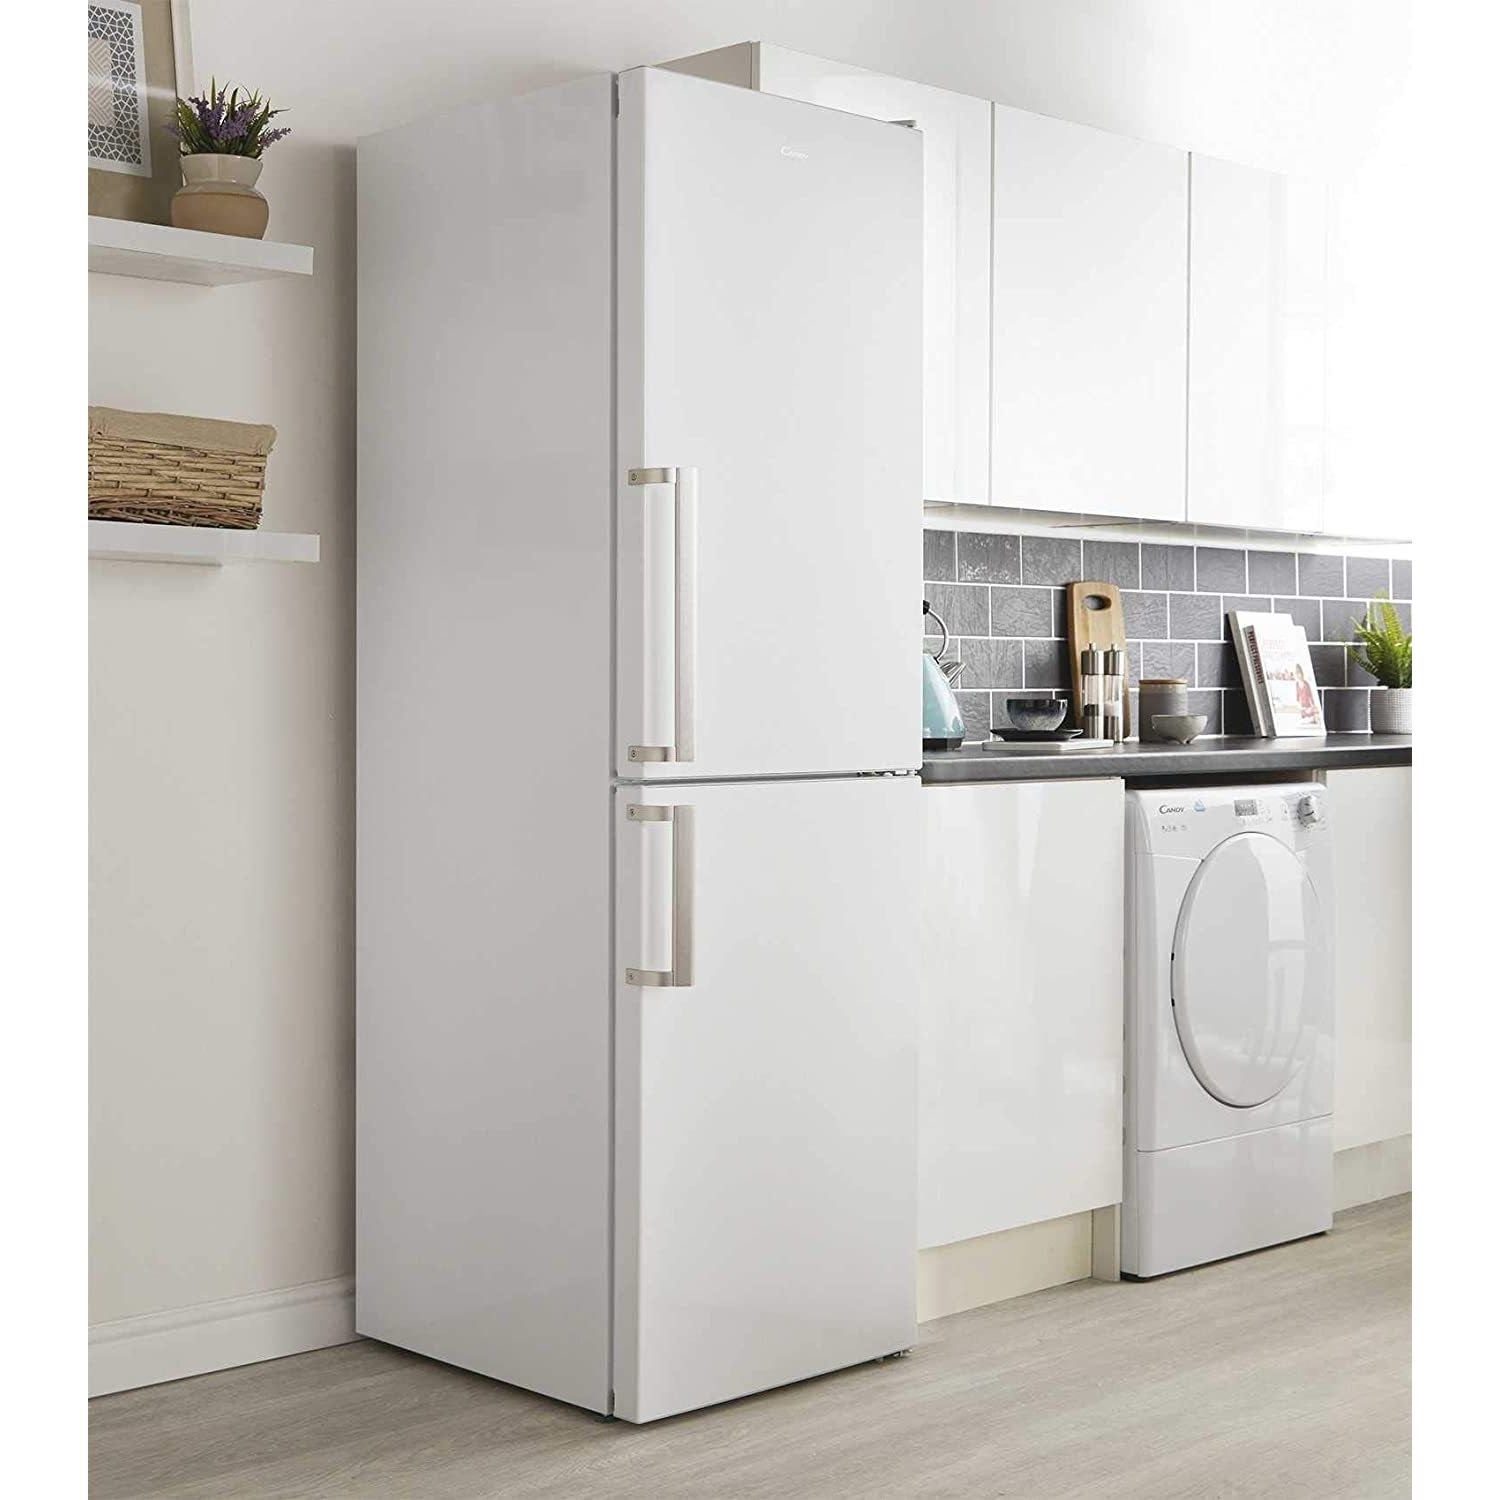 Fridge Freezer Frost Free 50/50 55cm Free Standing White 281 Litre capacity Candy CFF5195WHE A 